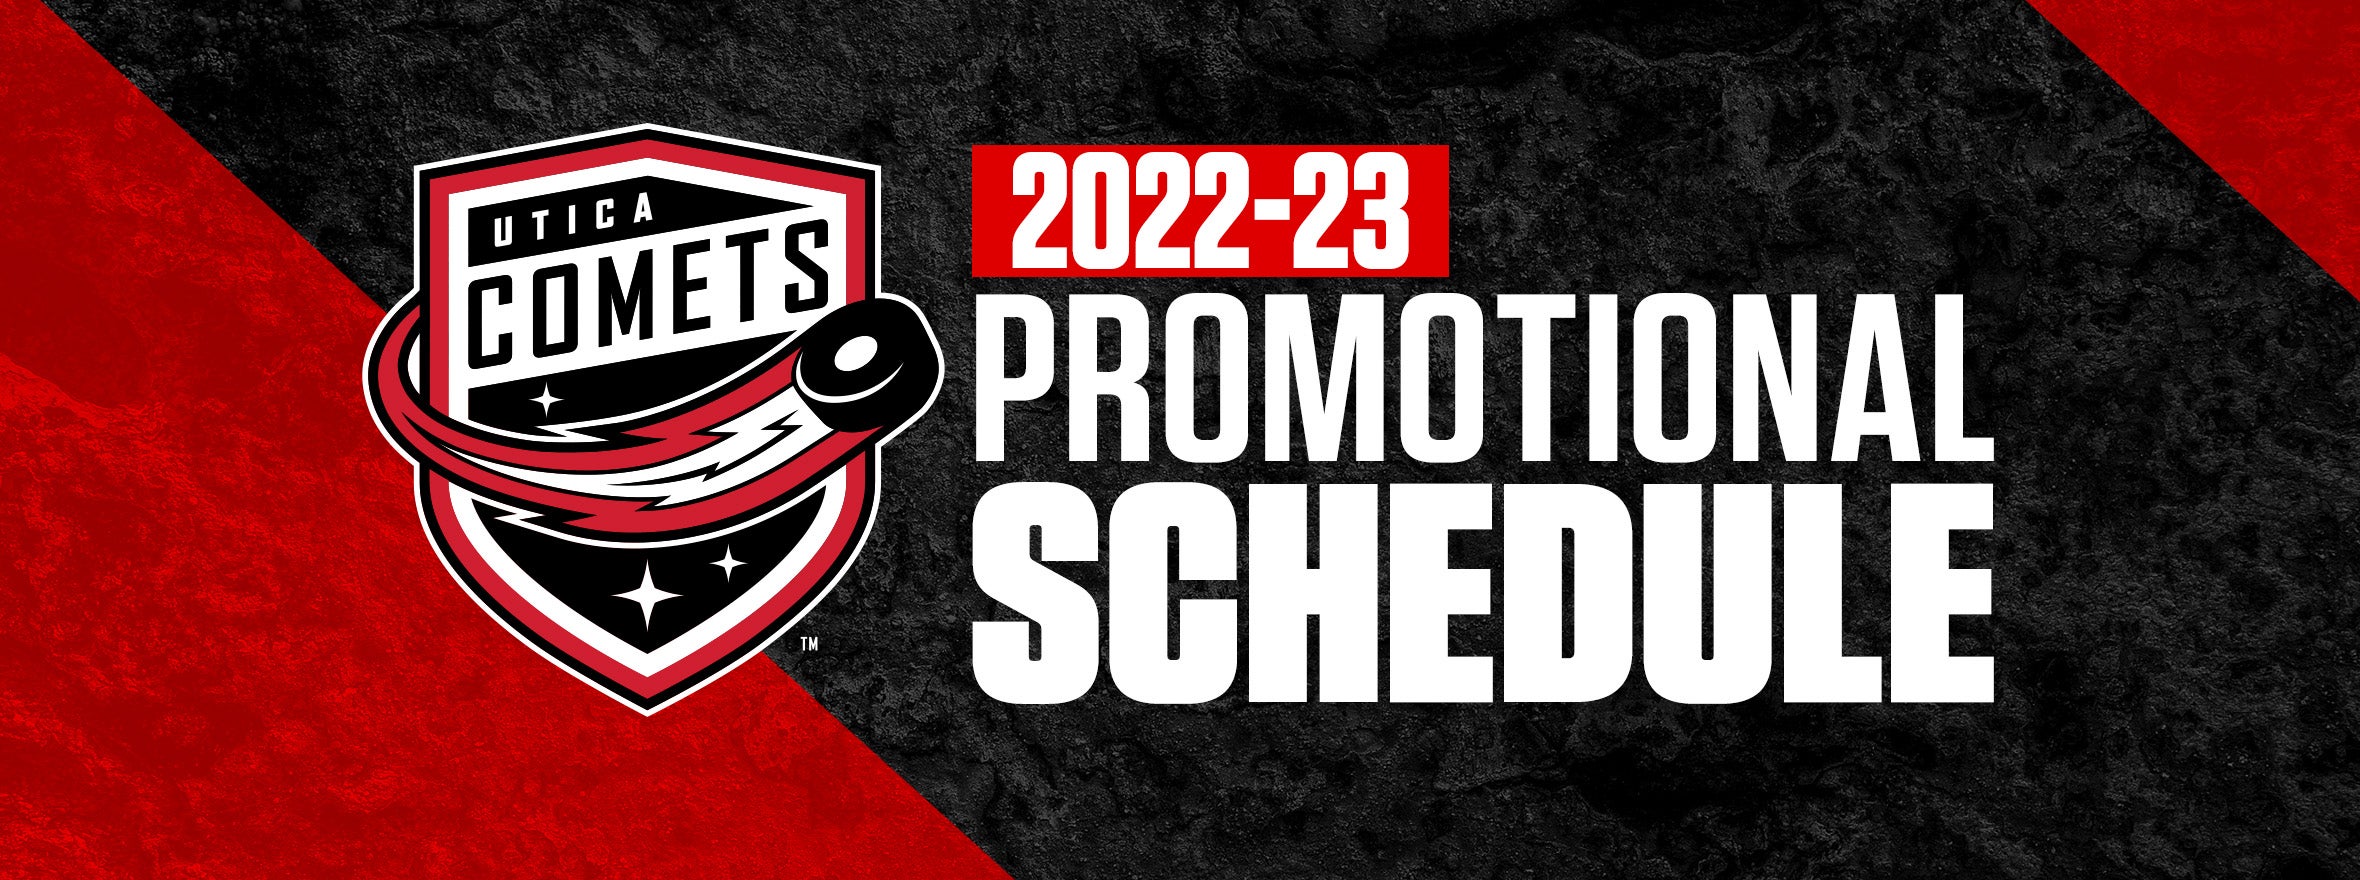 COMETS RELEASE NEW PROMOTIONAL SCHEDULE